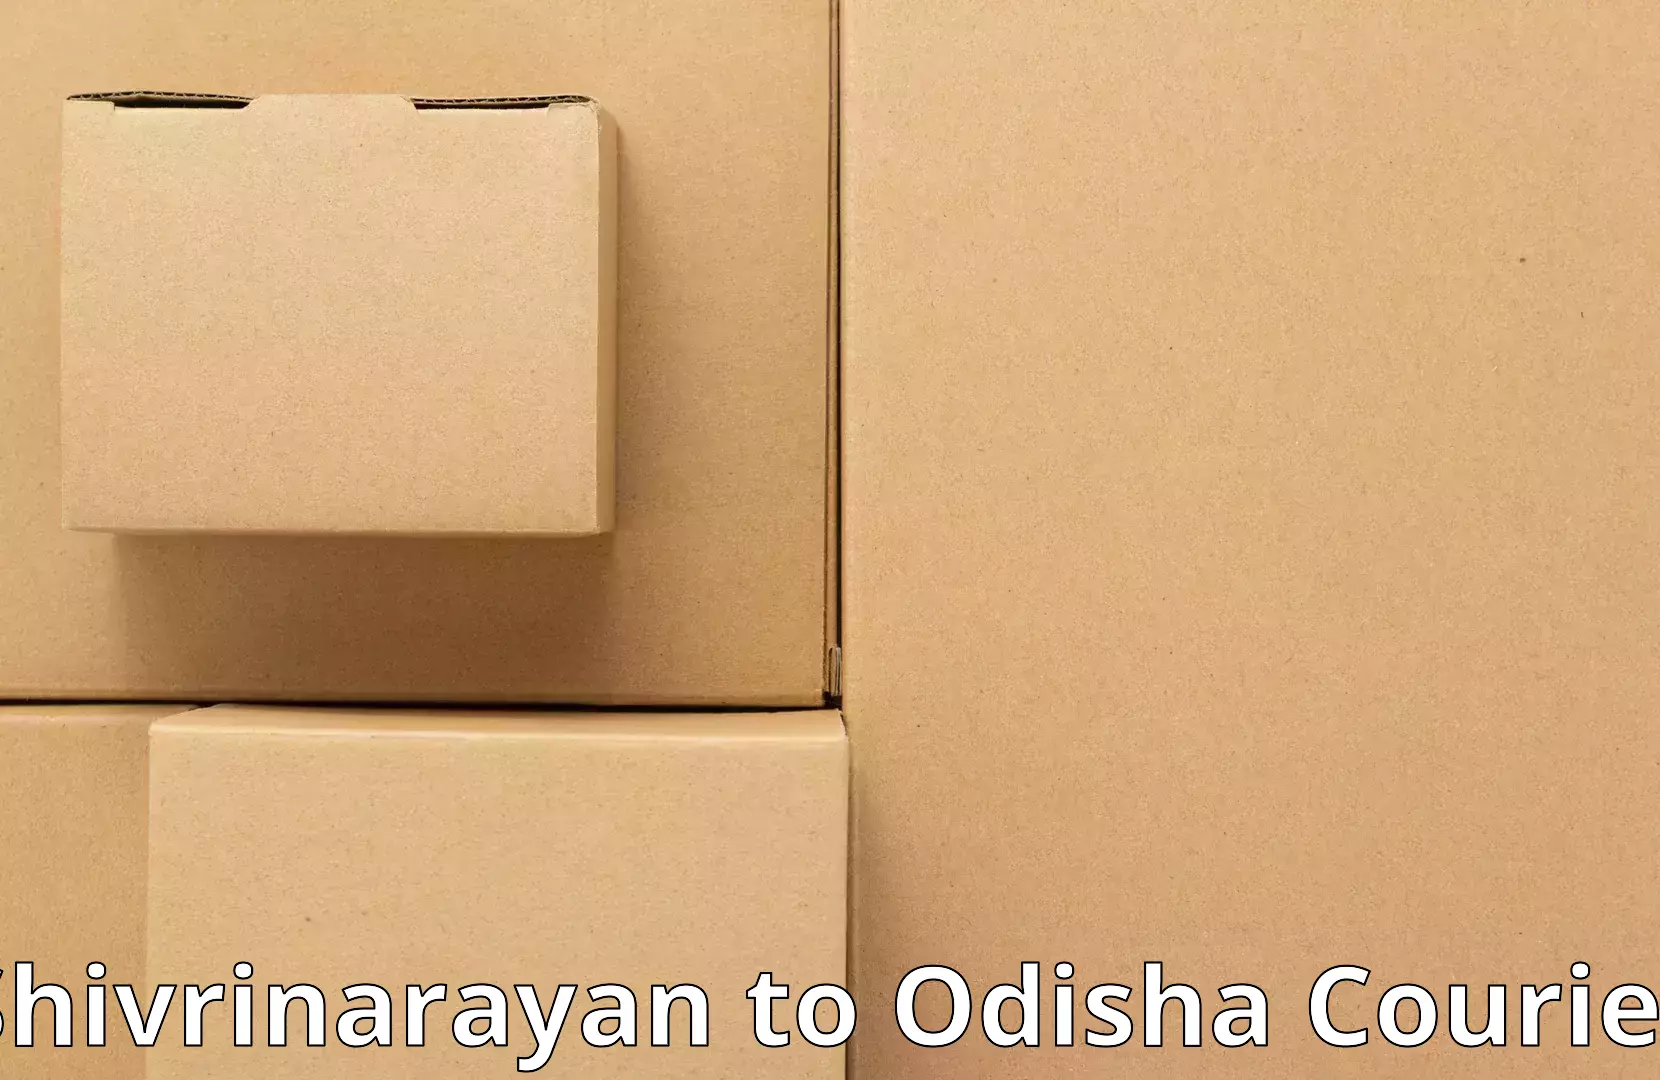 Efficient relocation services in Shivrinarayan to Nabarangpur